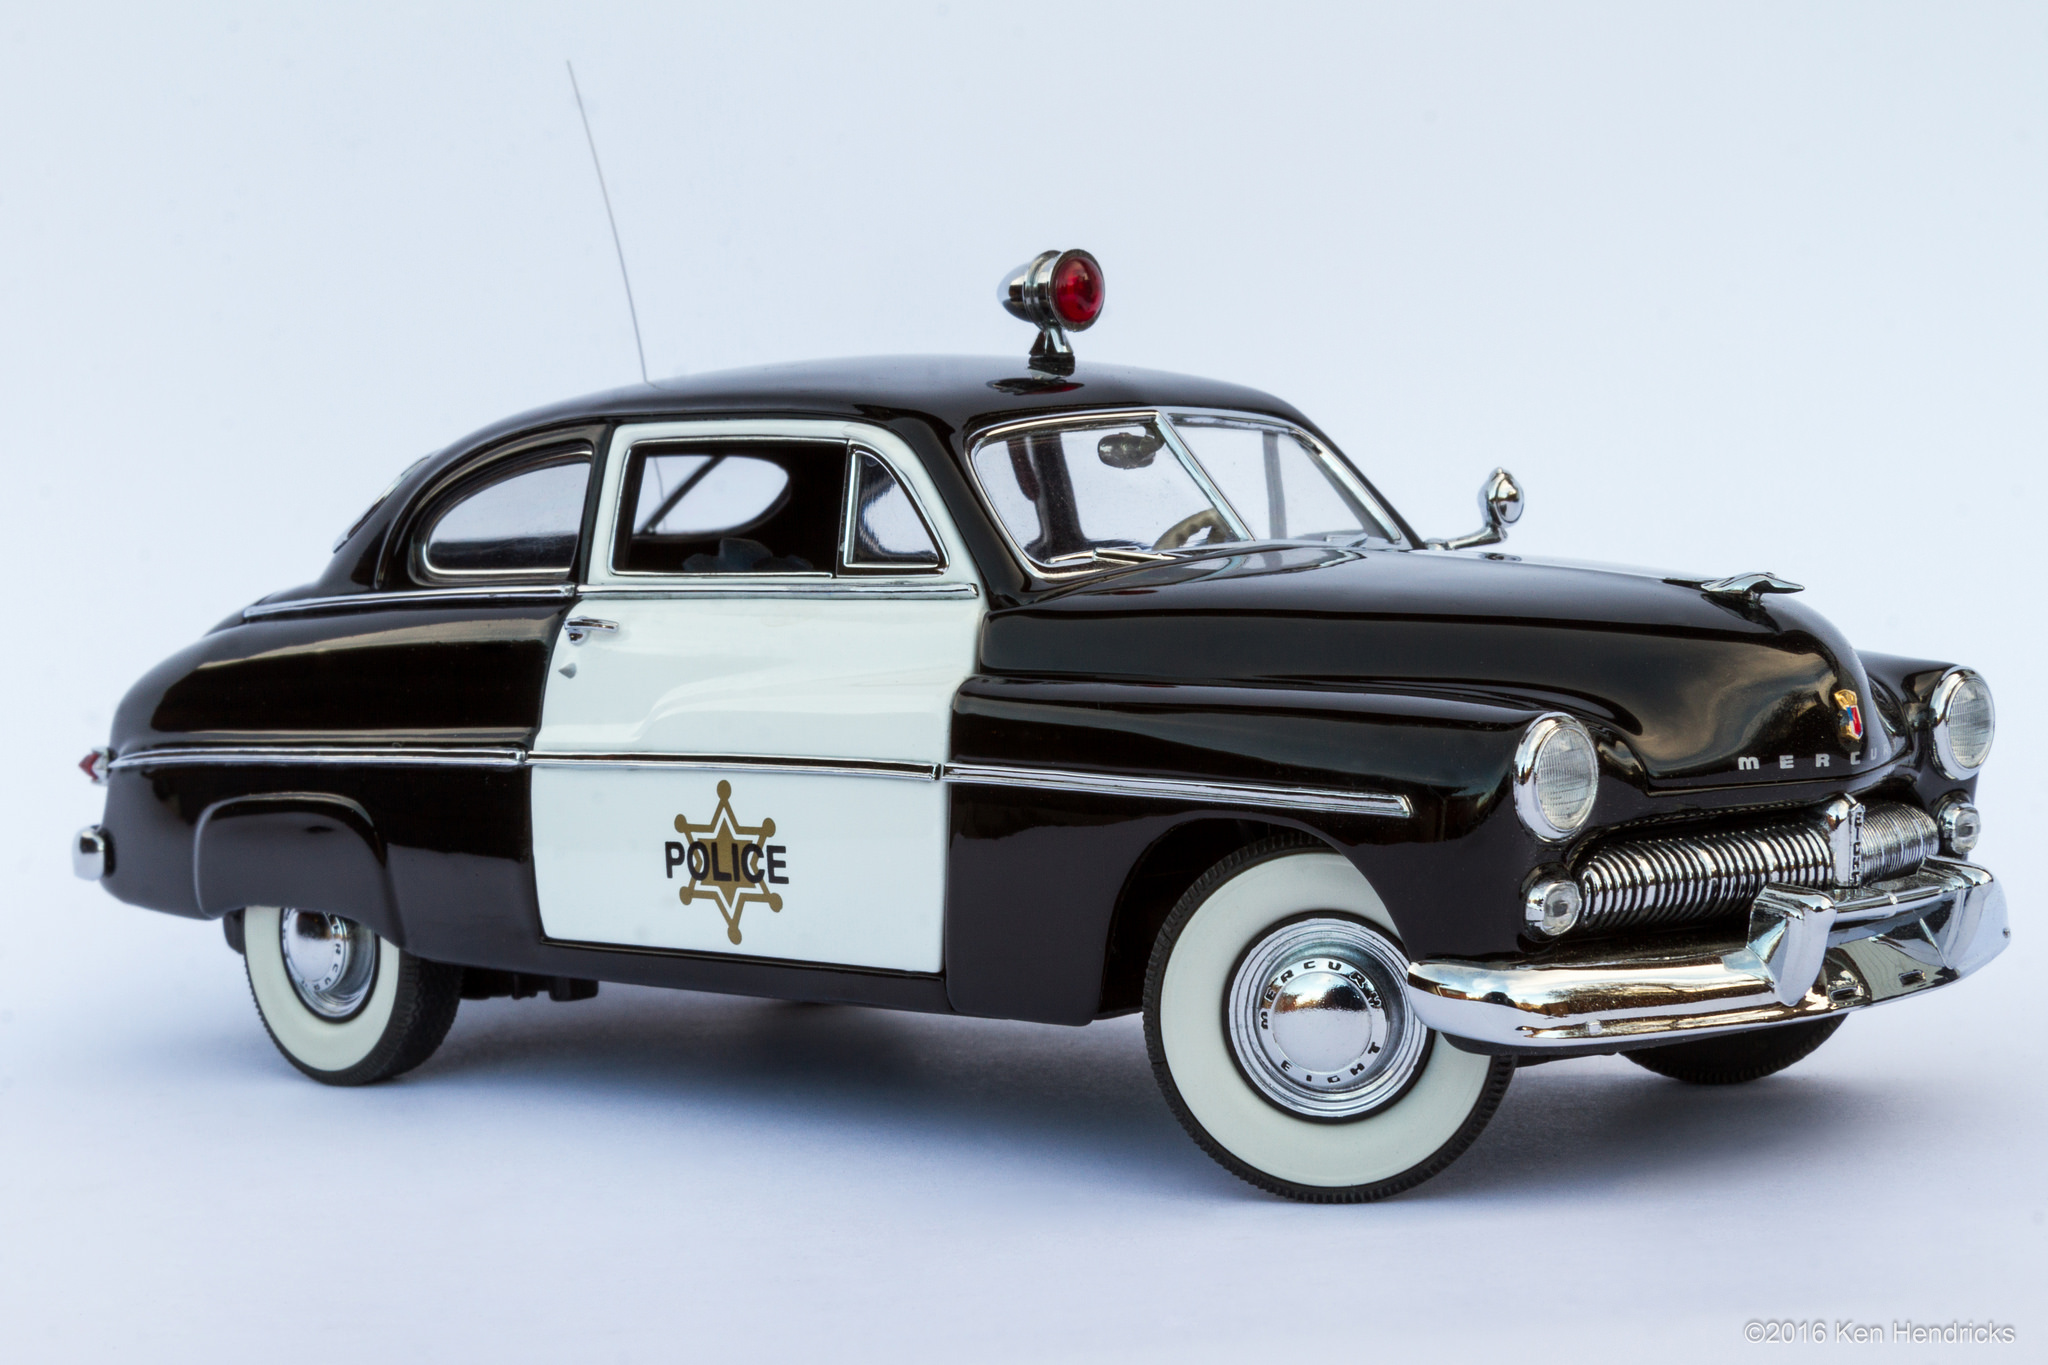 1949 mercury club coupe police car for Sale,Up To OFF 74%